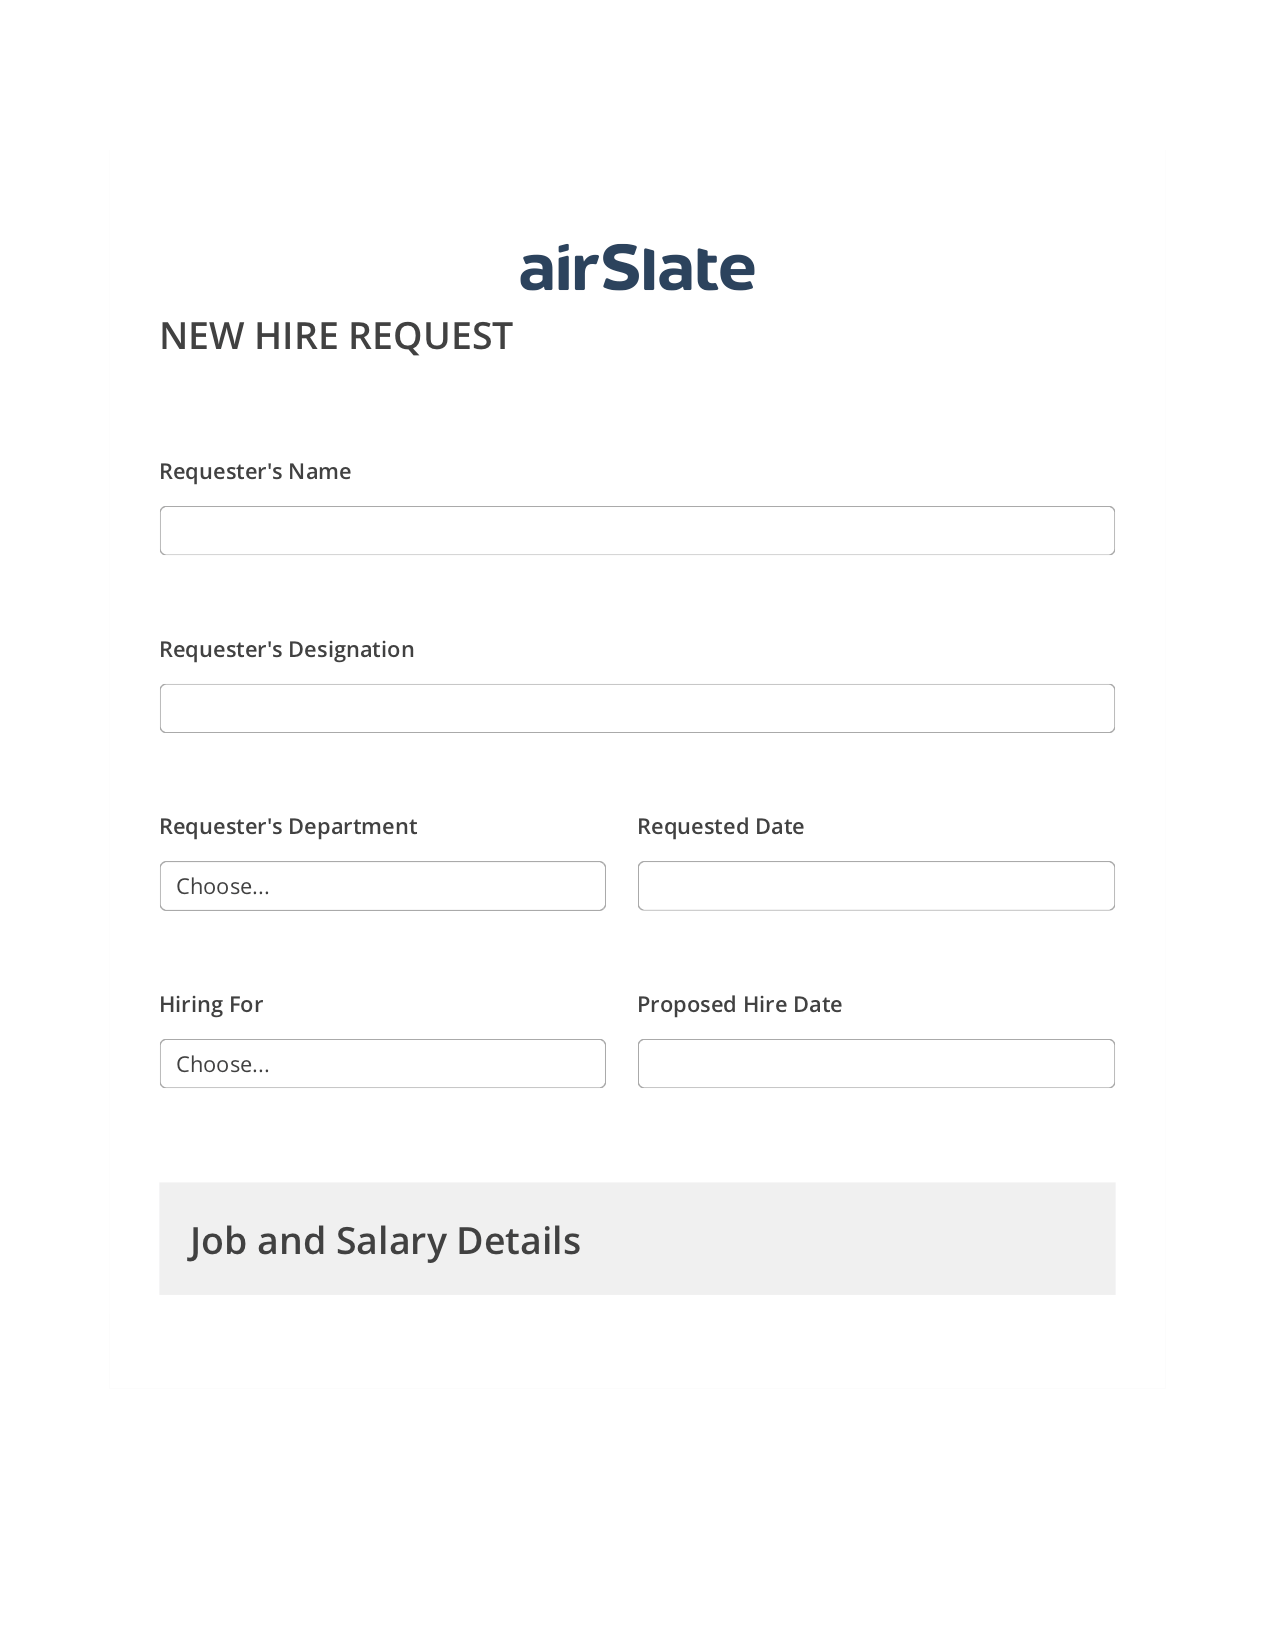 Hiring Request Workflow Pre-fill Dropdowns from CSV file Bot, Hide Signatures Bot, Archive to Dropbox Bot